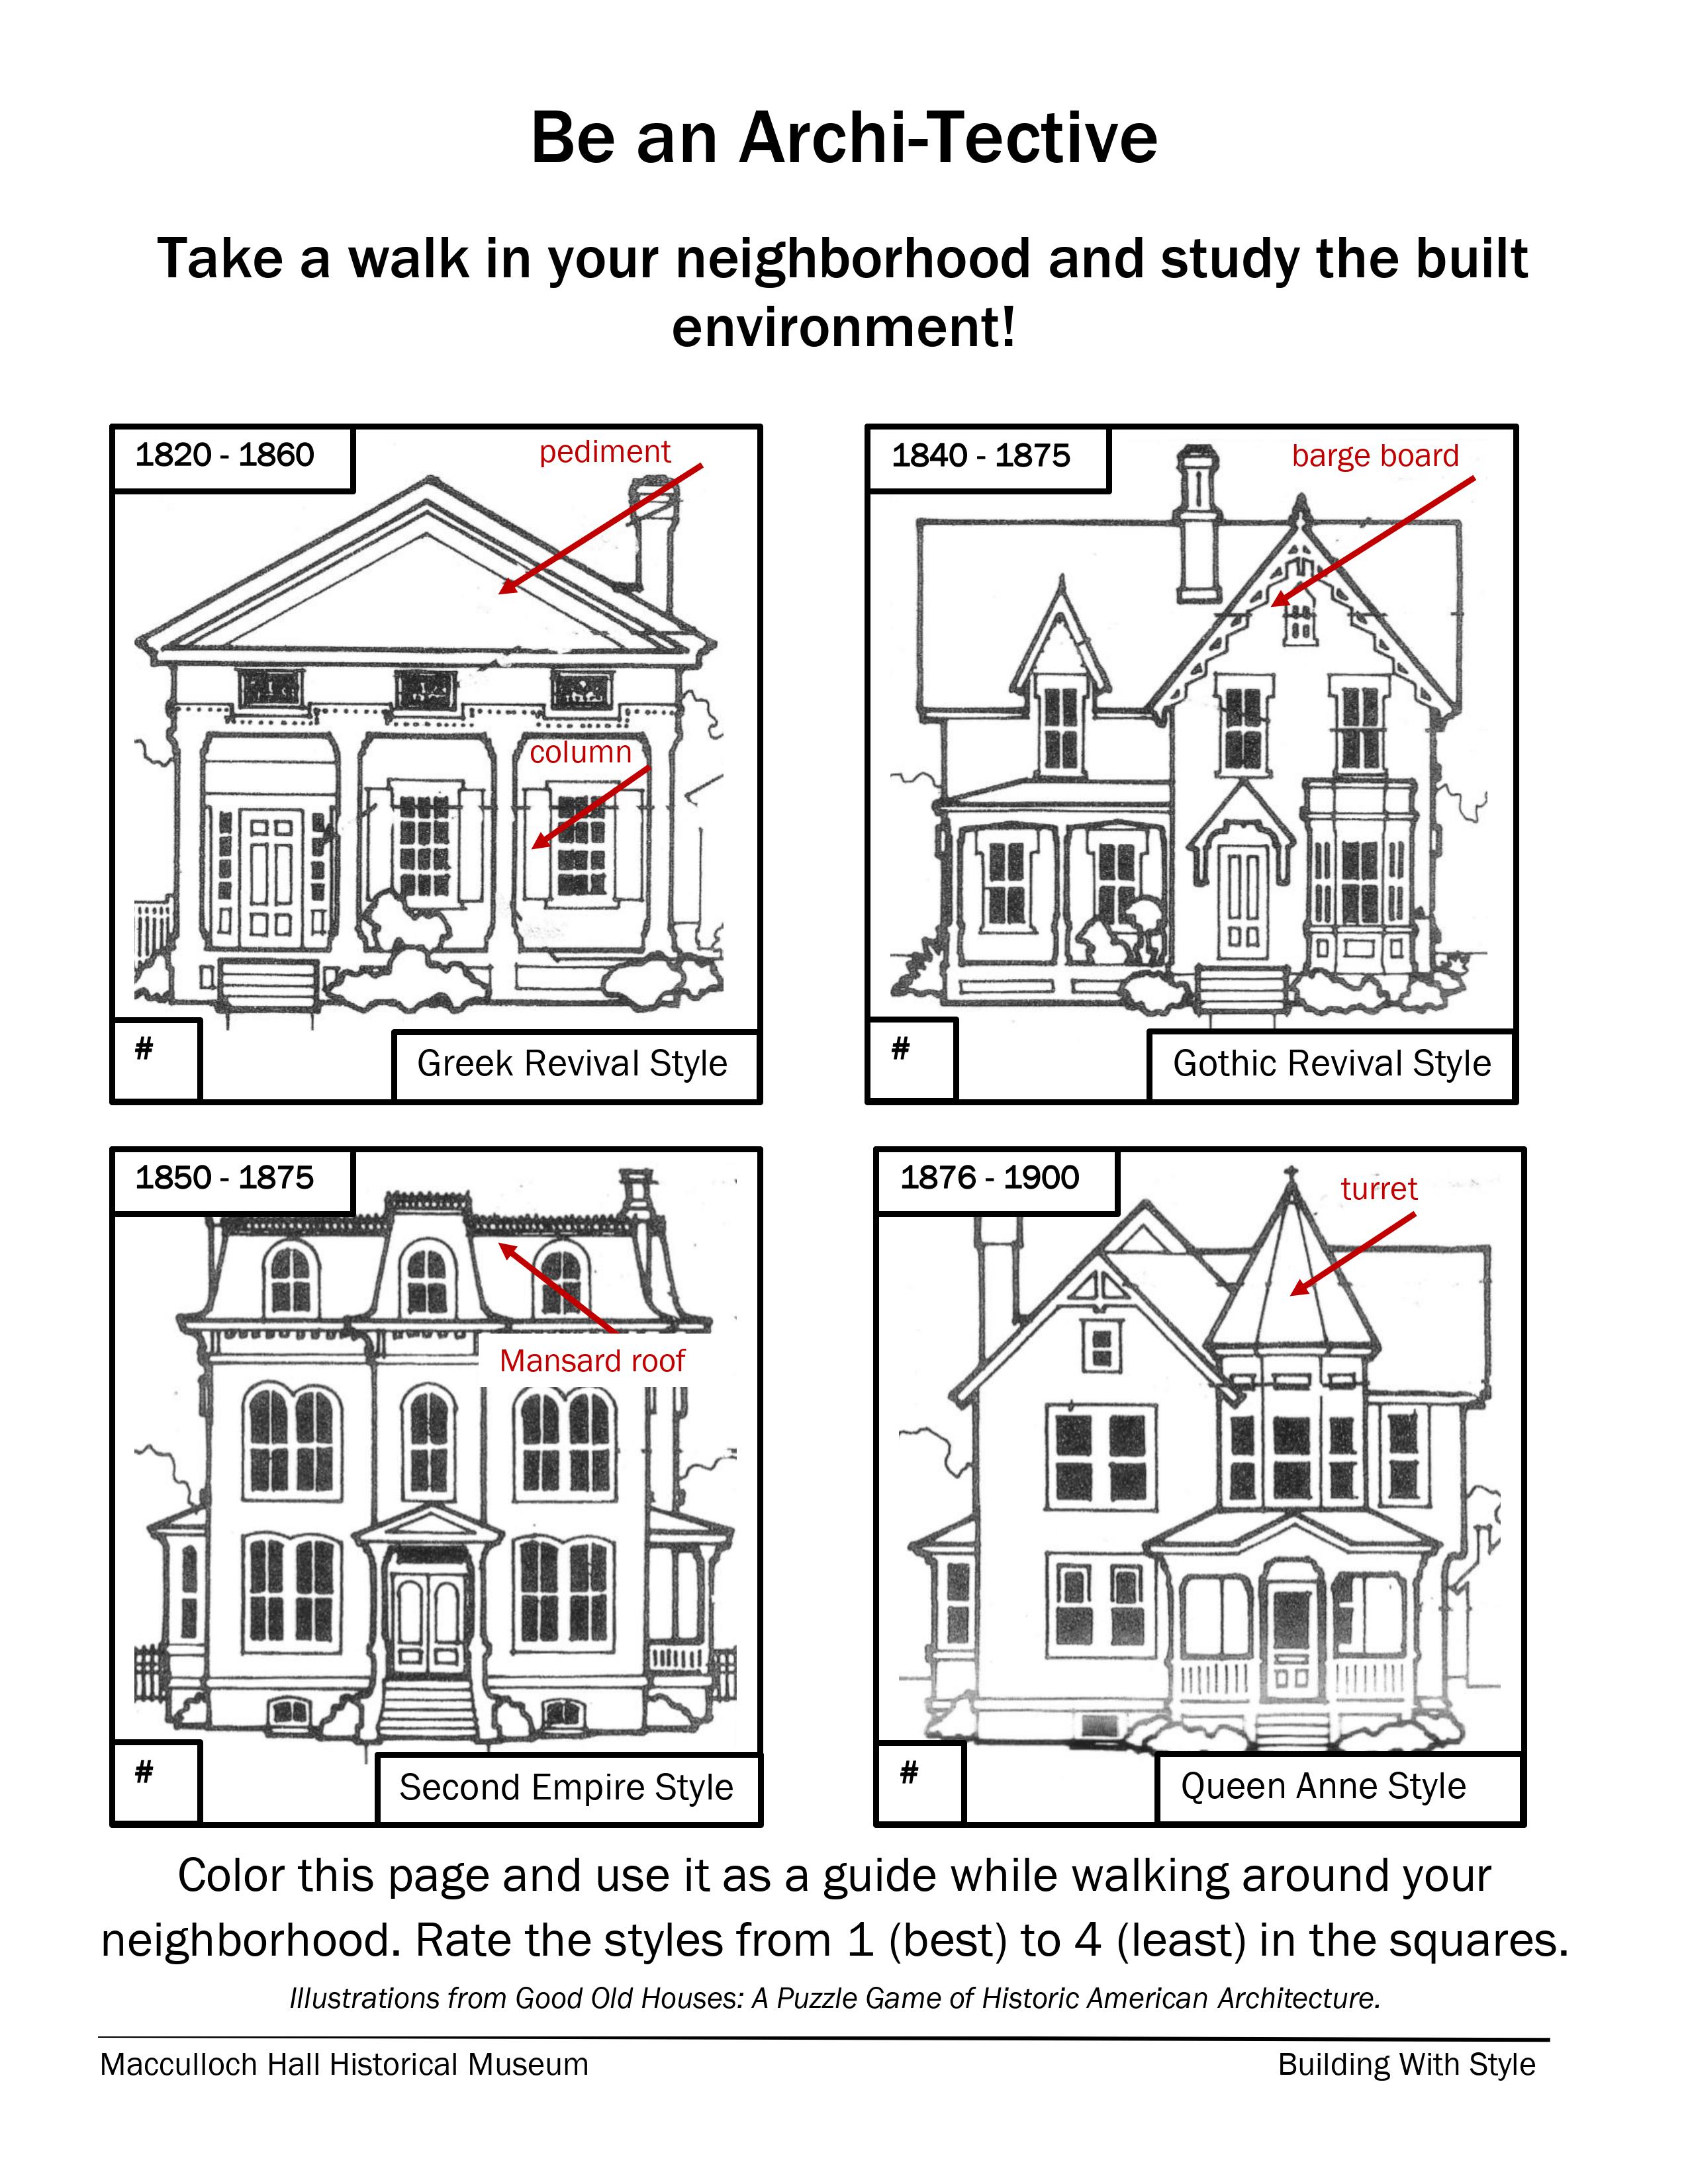 Take a walk in your neighborhood and, using the sheet below, see if you can identify architectural details in local buildings.